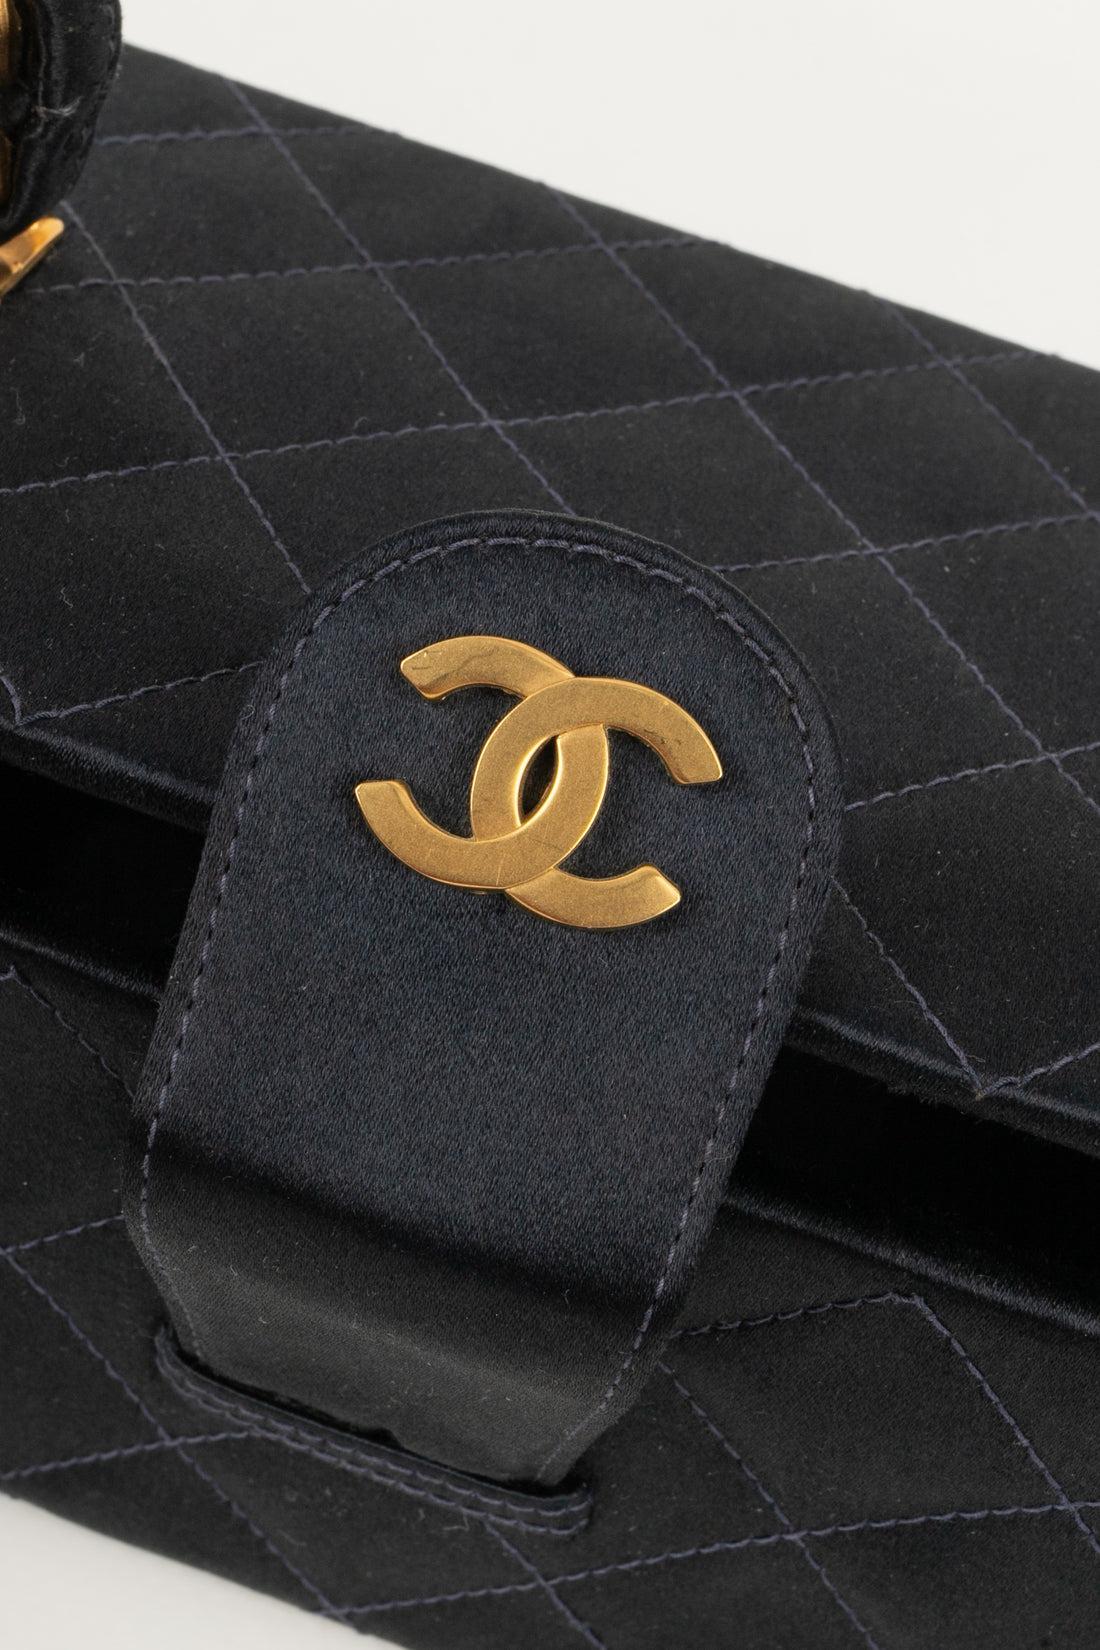 Chanel Quilted Silk Satin Bag with Golden Metal Elements, 1994/1996 3